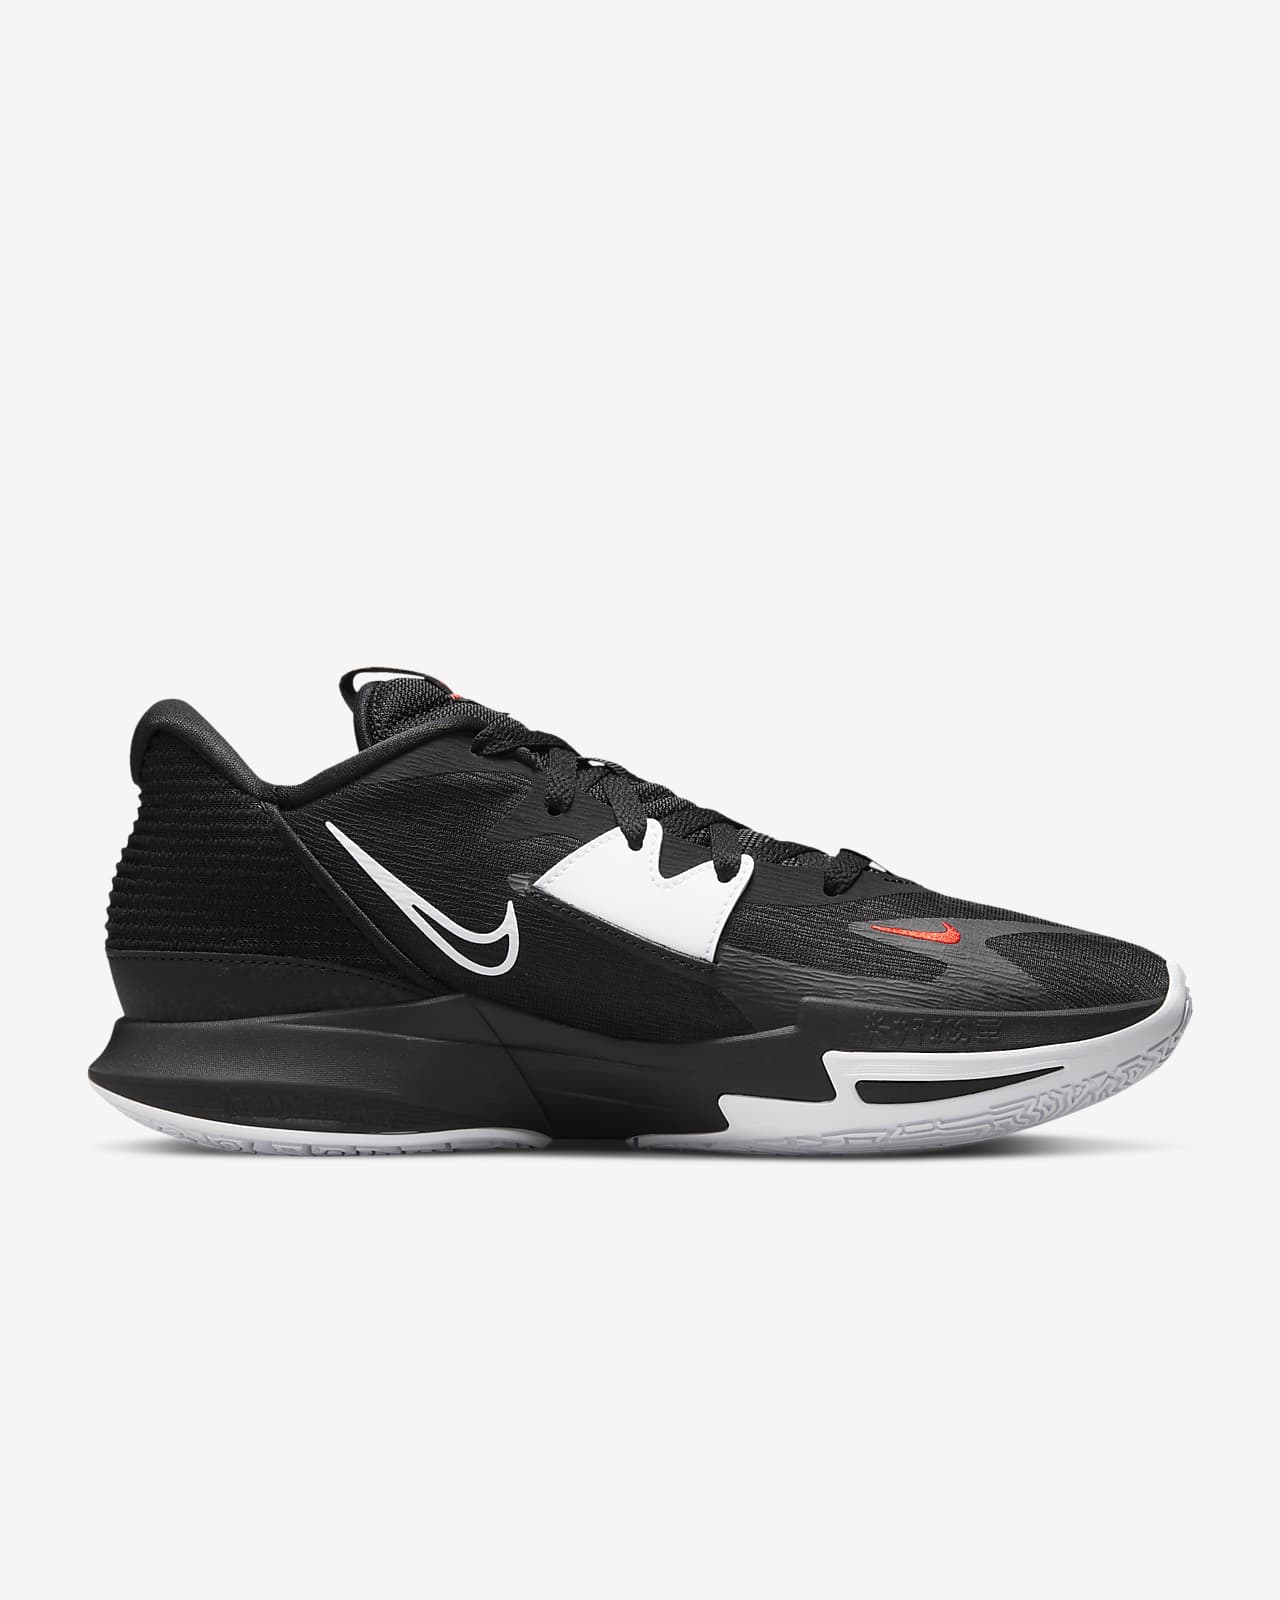 Kyrie Low 5 EP Basketball Shoes. Nike ID